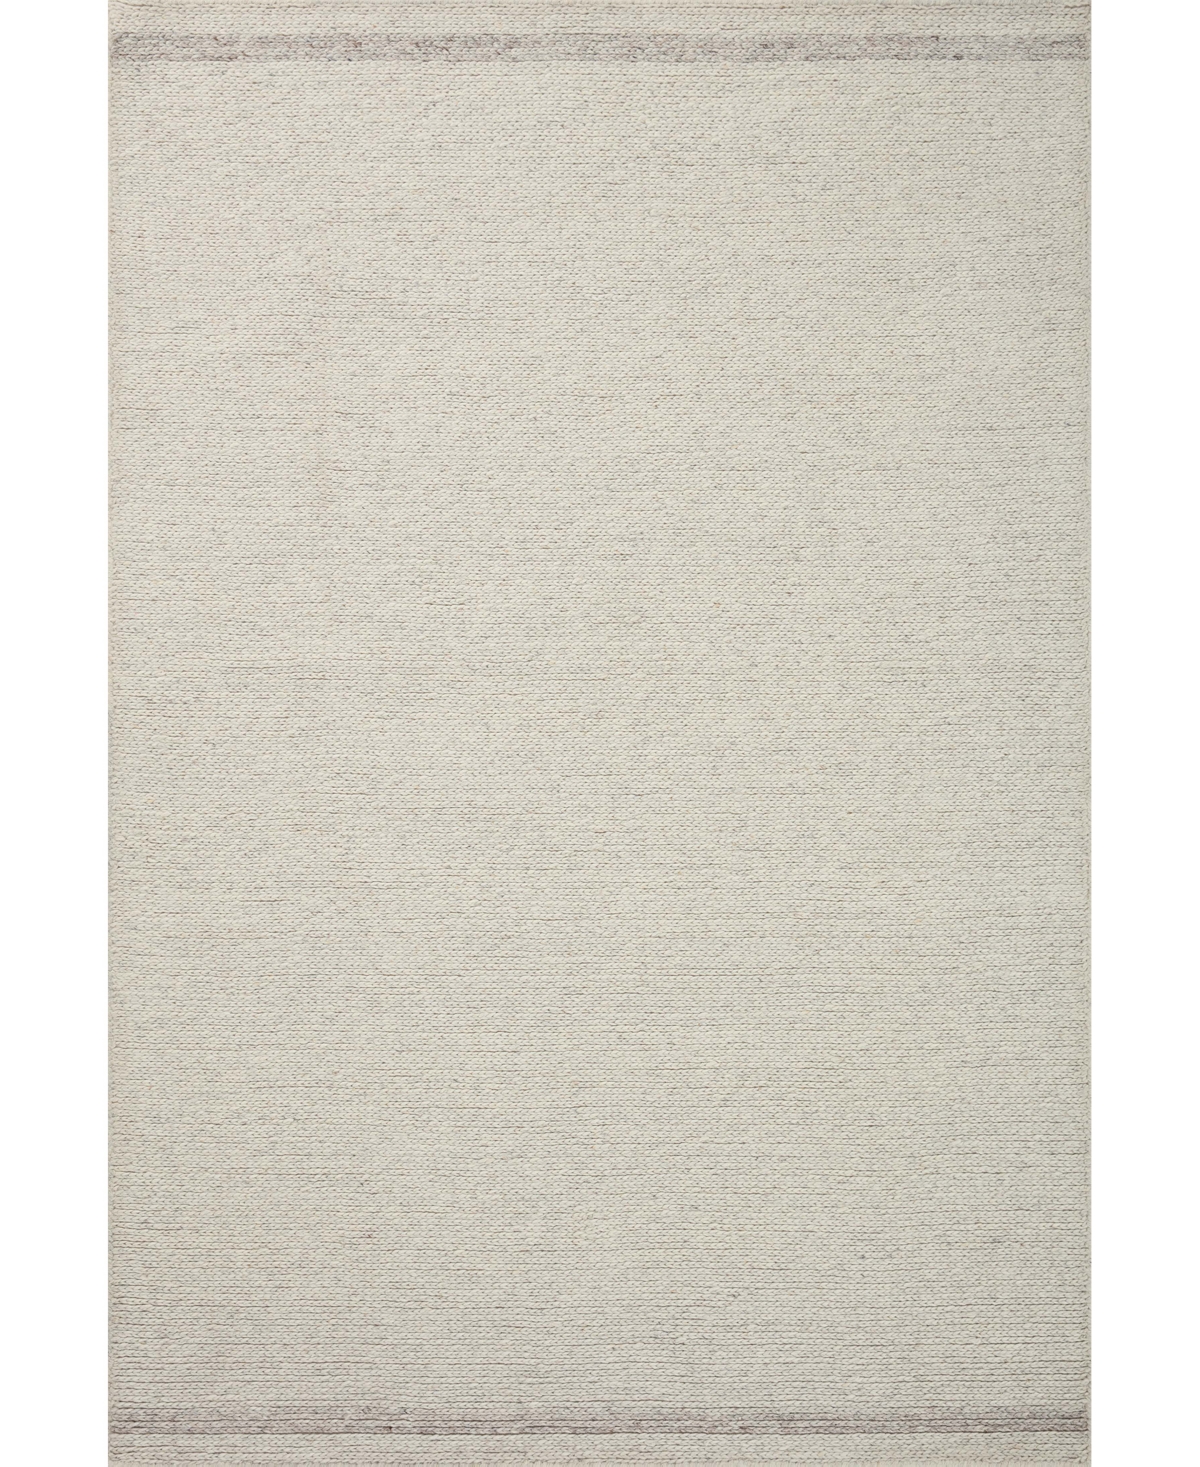 Magnolia Home By Joanna Gaines X Loloi Ashby Ash-02 2'3" X 3'9" Area Rug In Mist